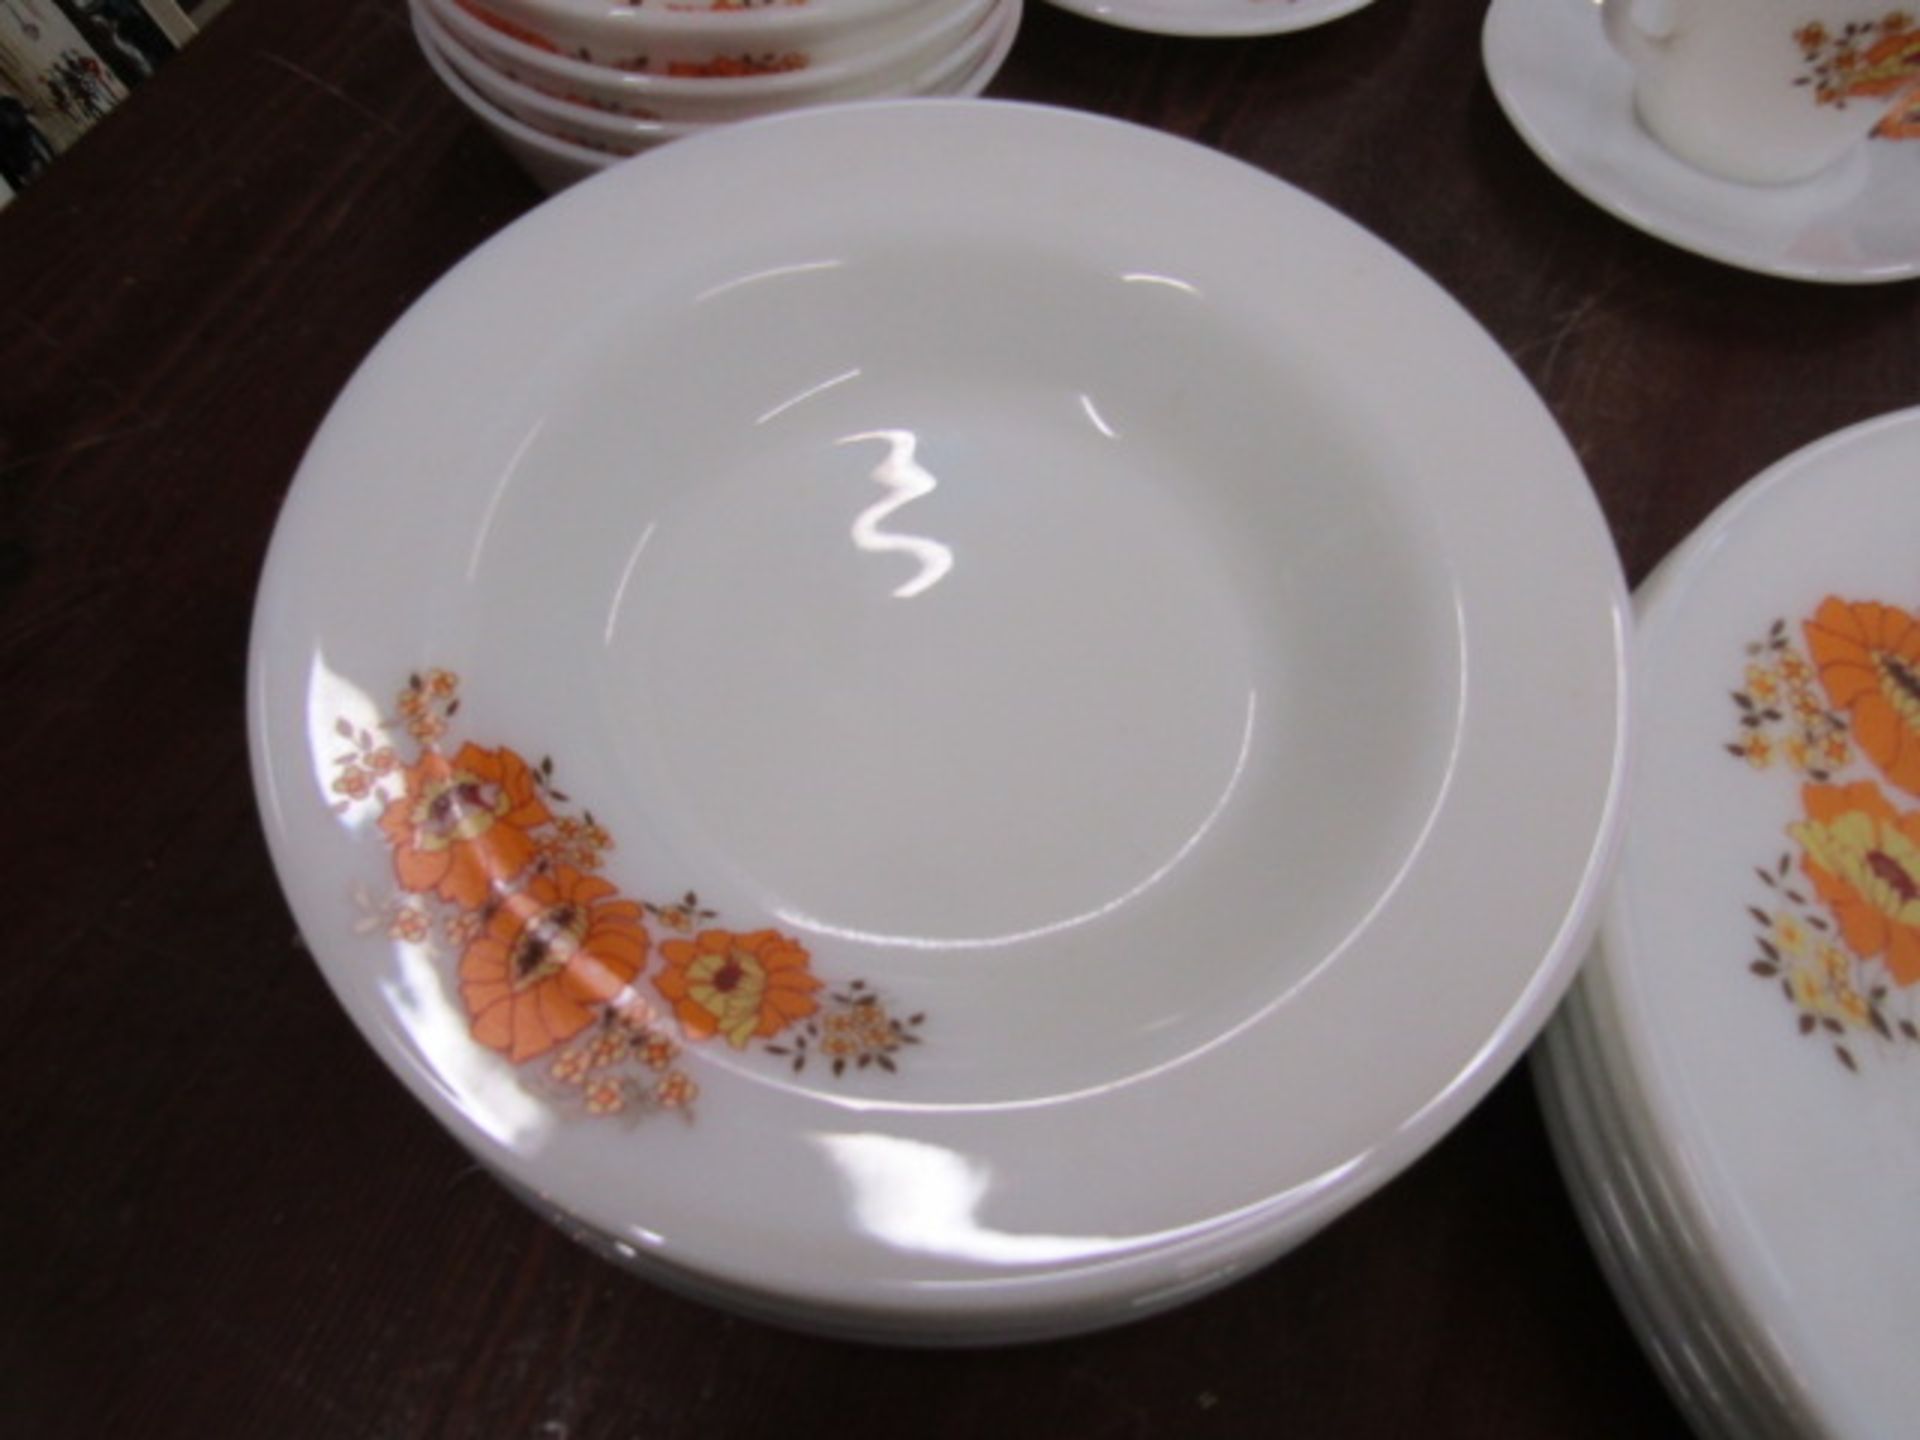 Pyrex 'Marigold' 34 piece part dinner set comprising 5 dinner plates, 6 side, 6 cups and saucers, - Image 2 of 3